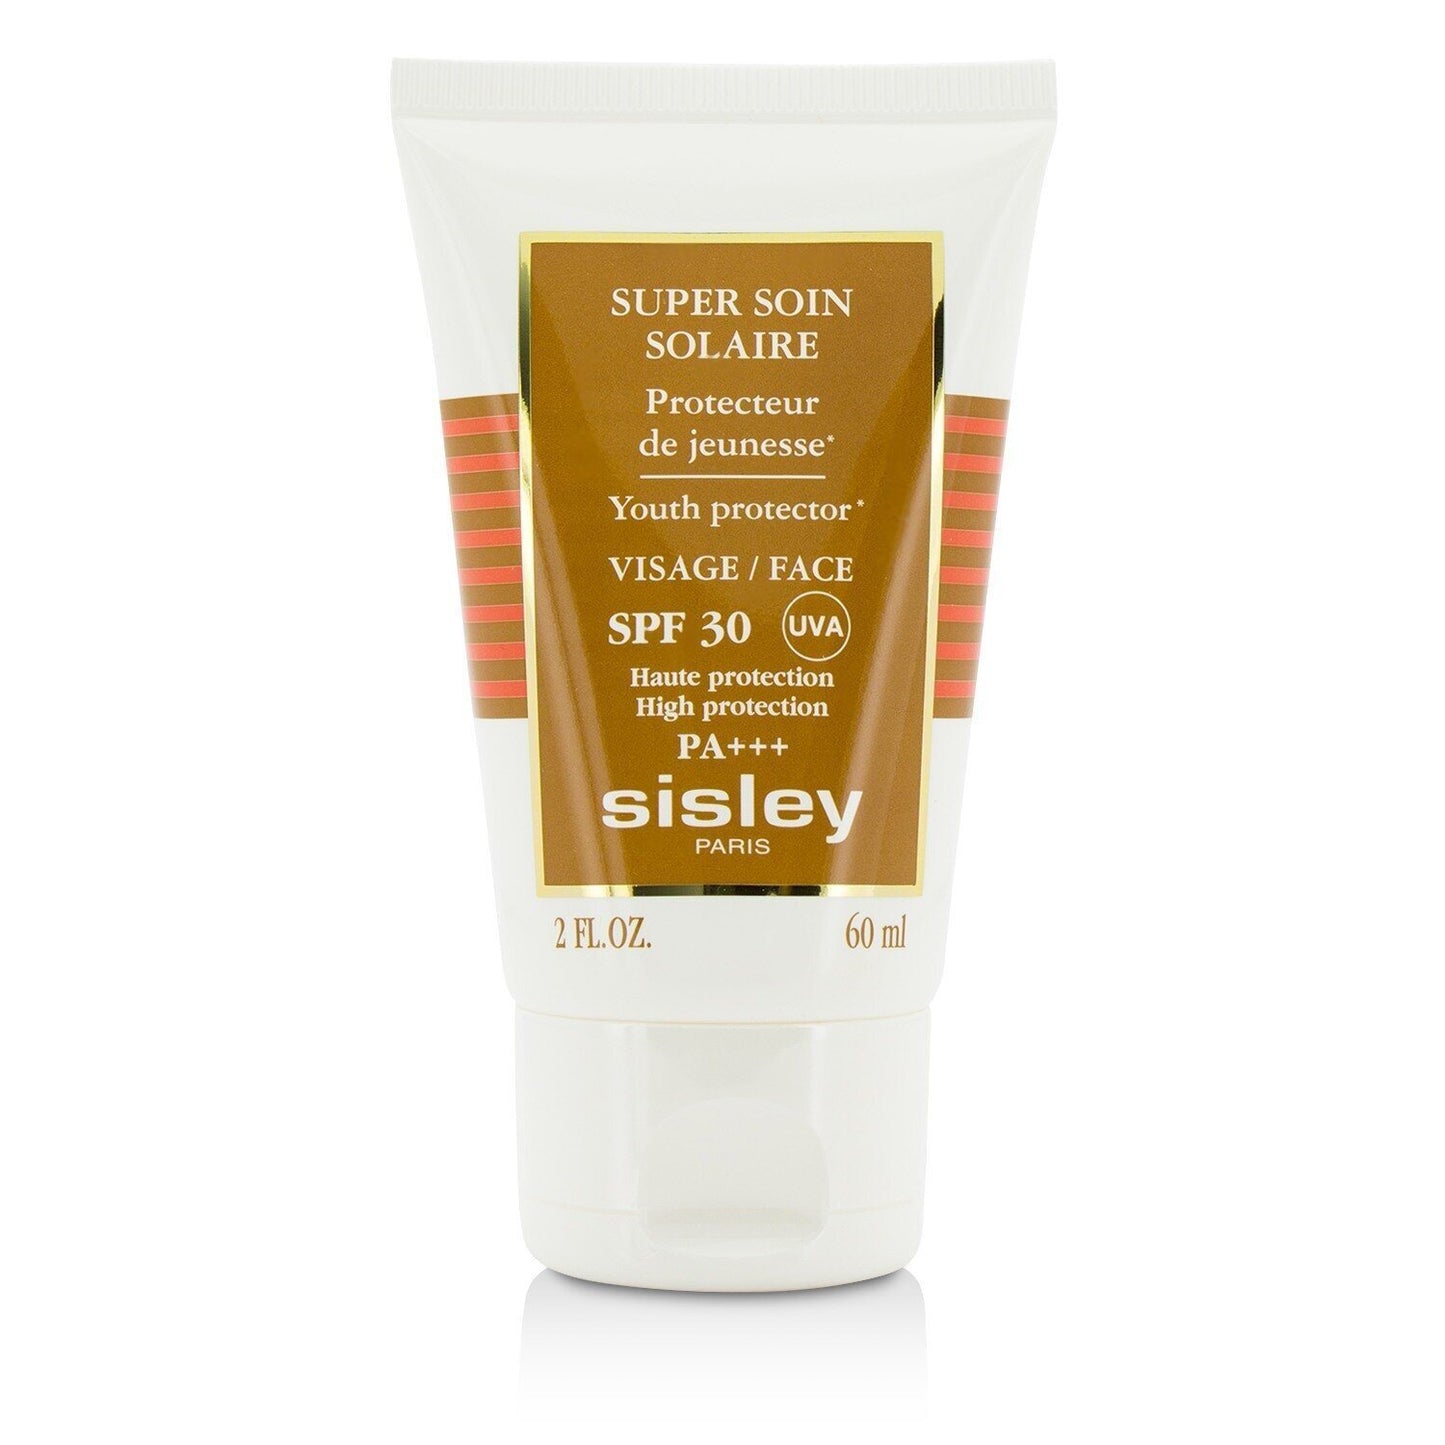 Super Soin Solaire Youth Protector For Face SPF 30 UVA PA+++